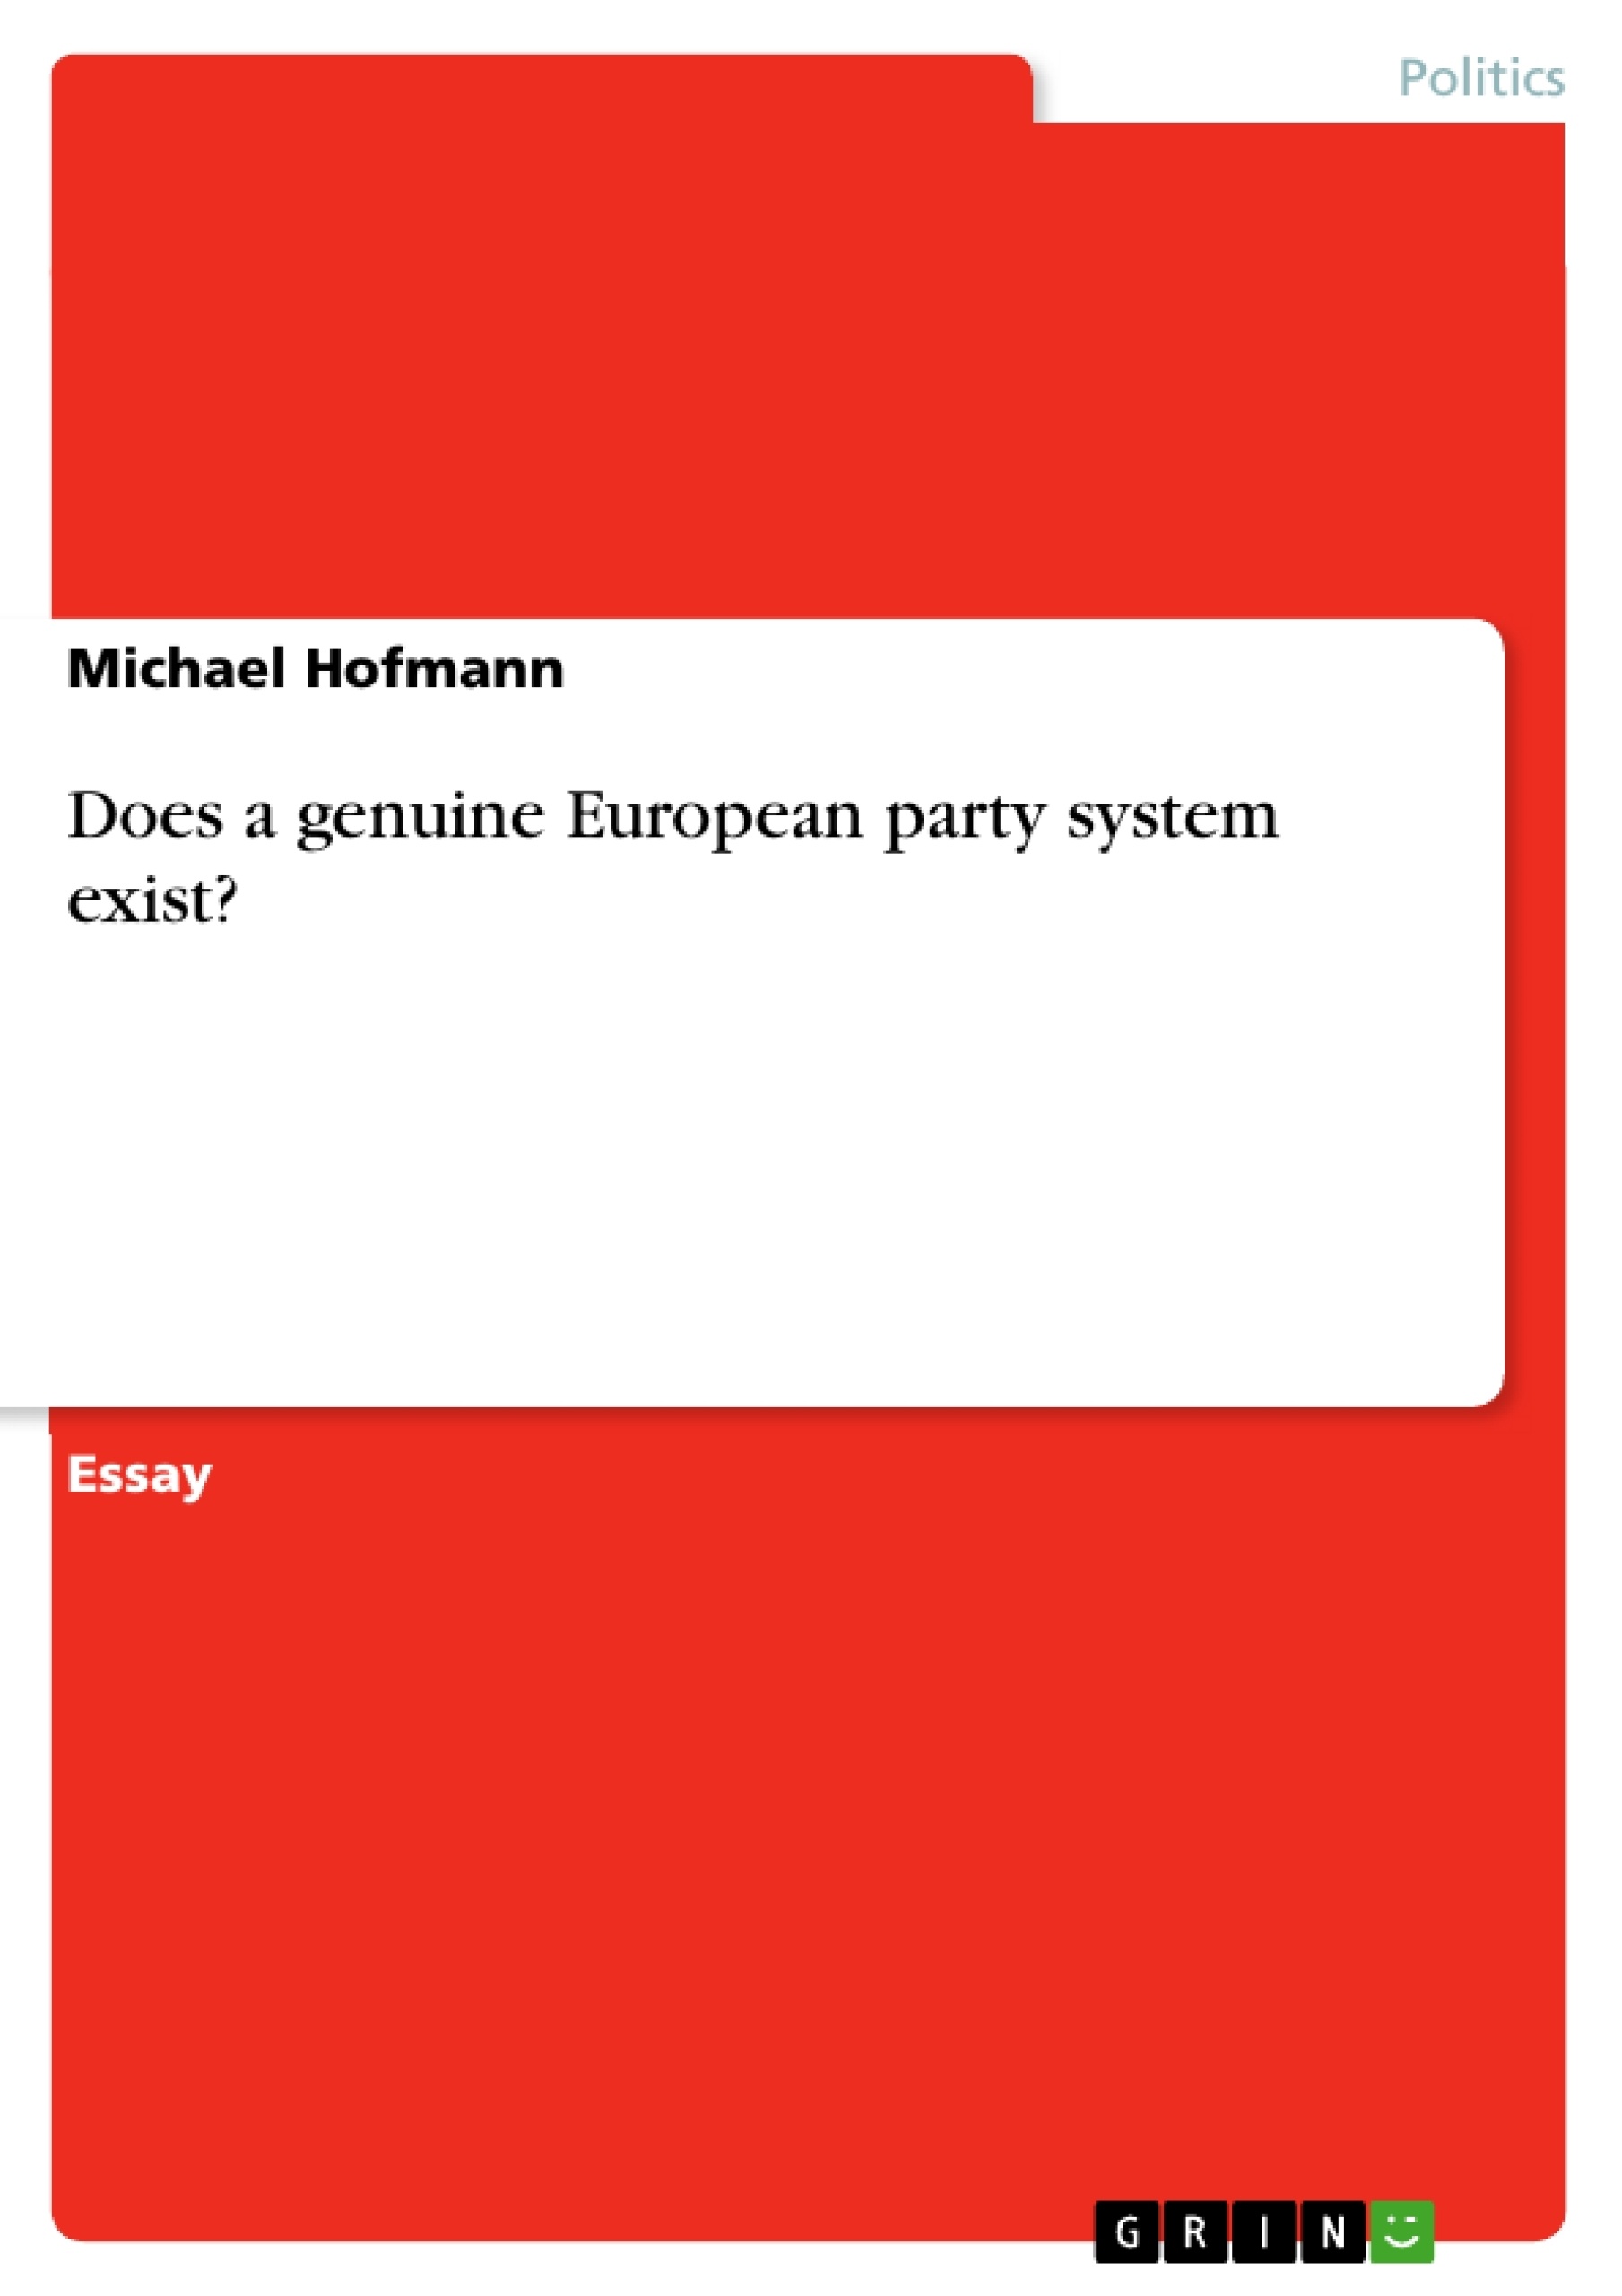 Title: Does a genuine European party system exist?